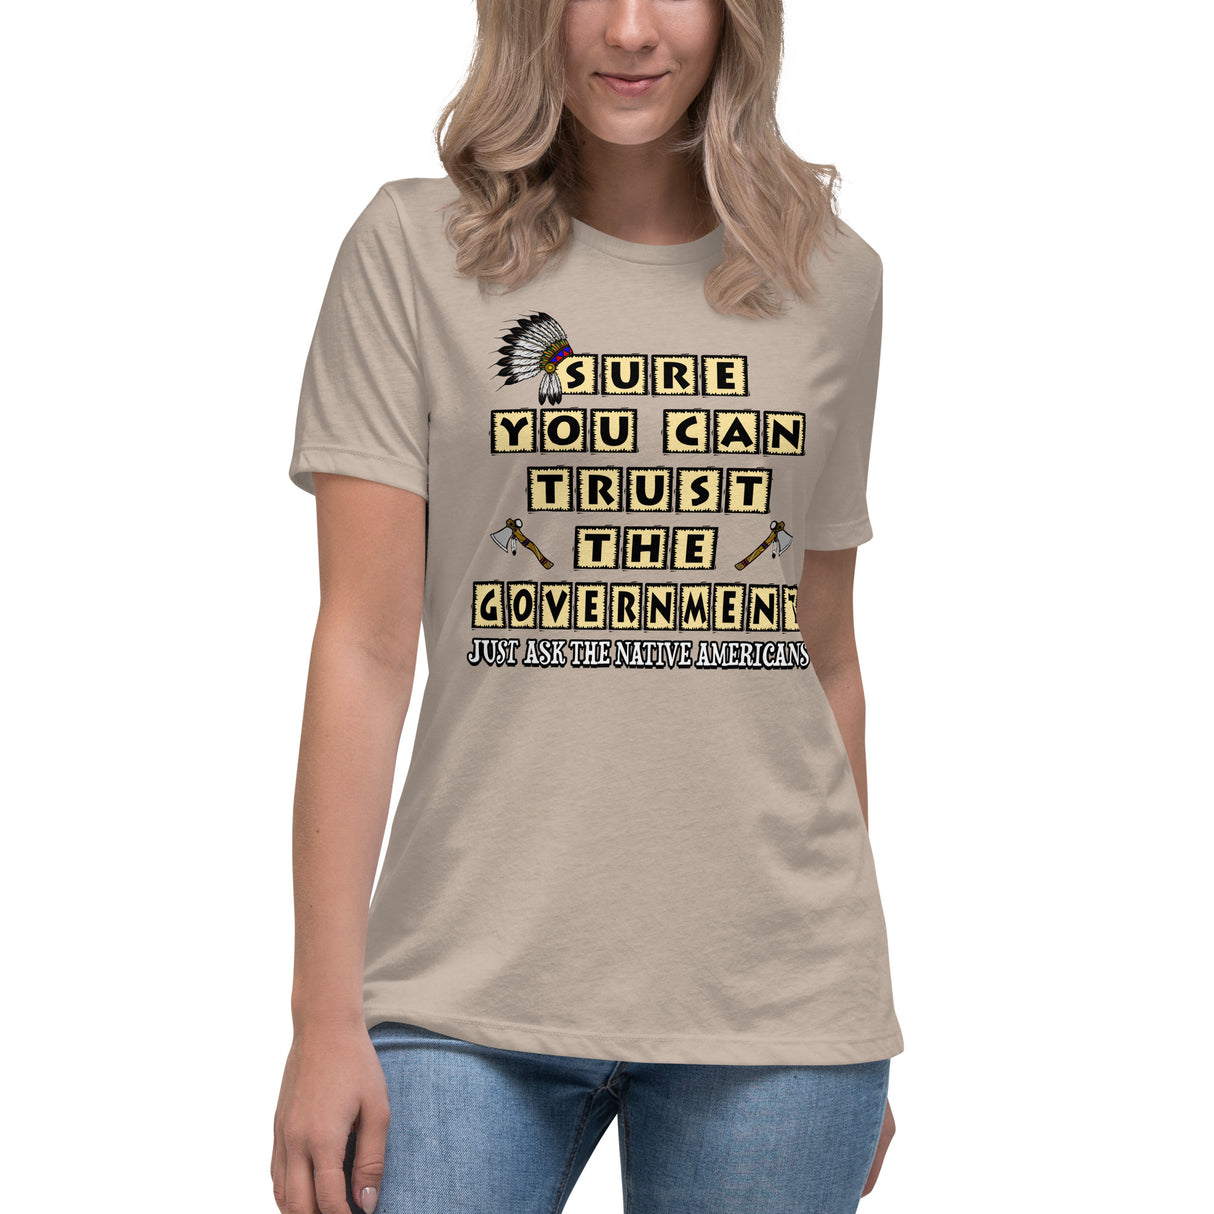 Sure You Can Trust The Government Women's Shirt